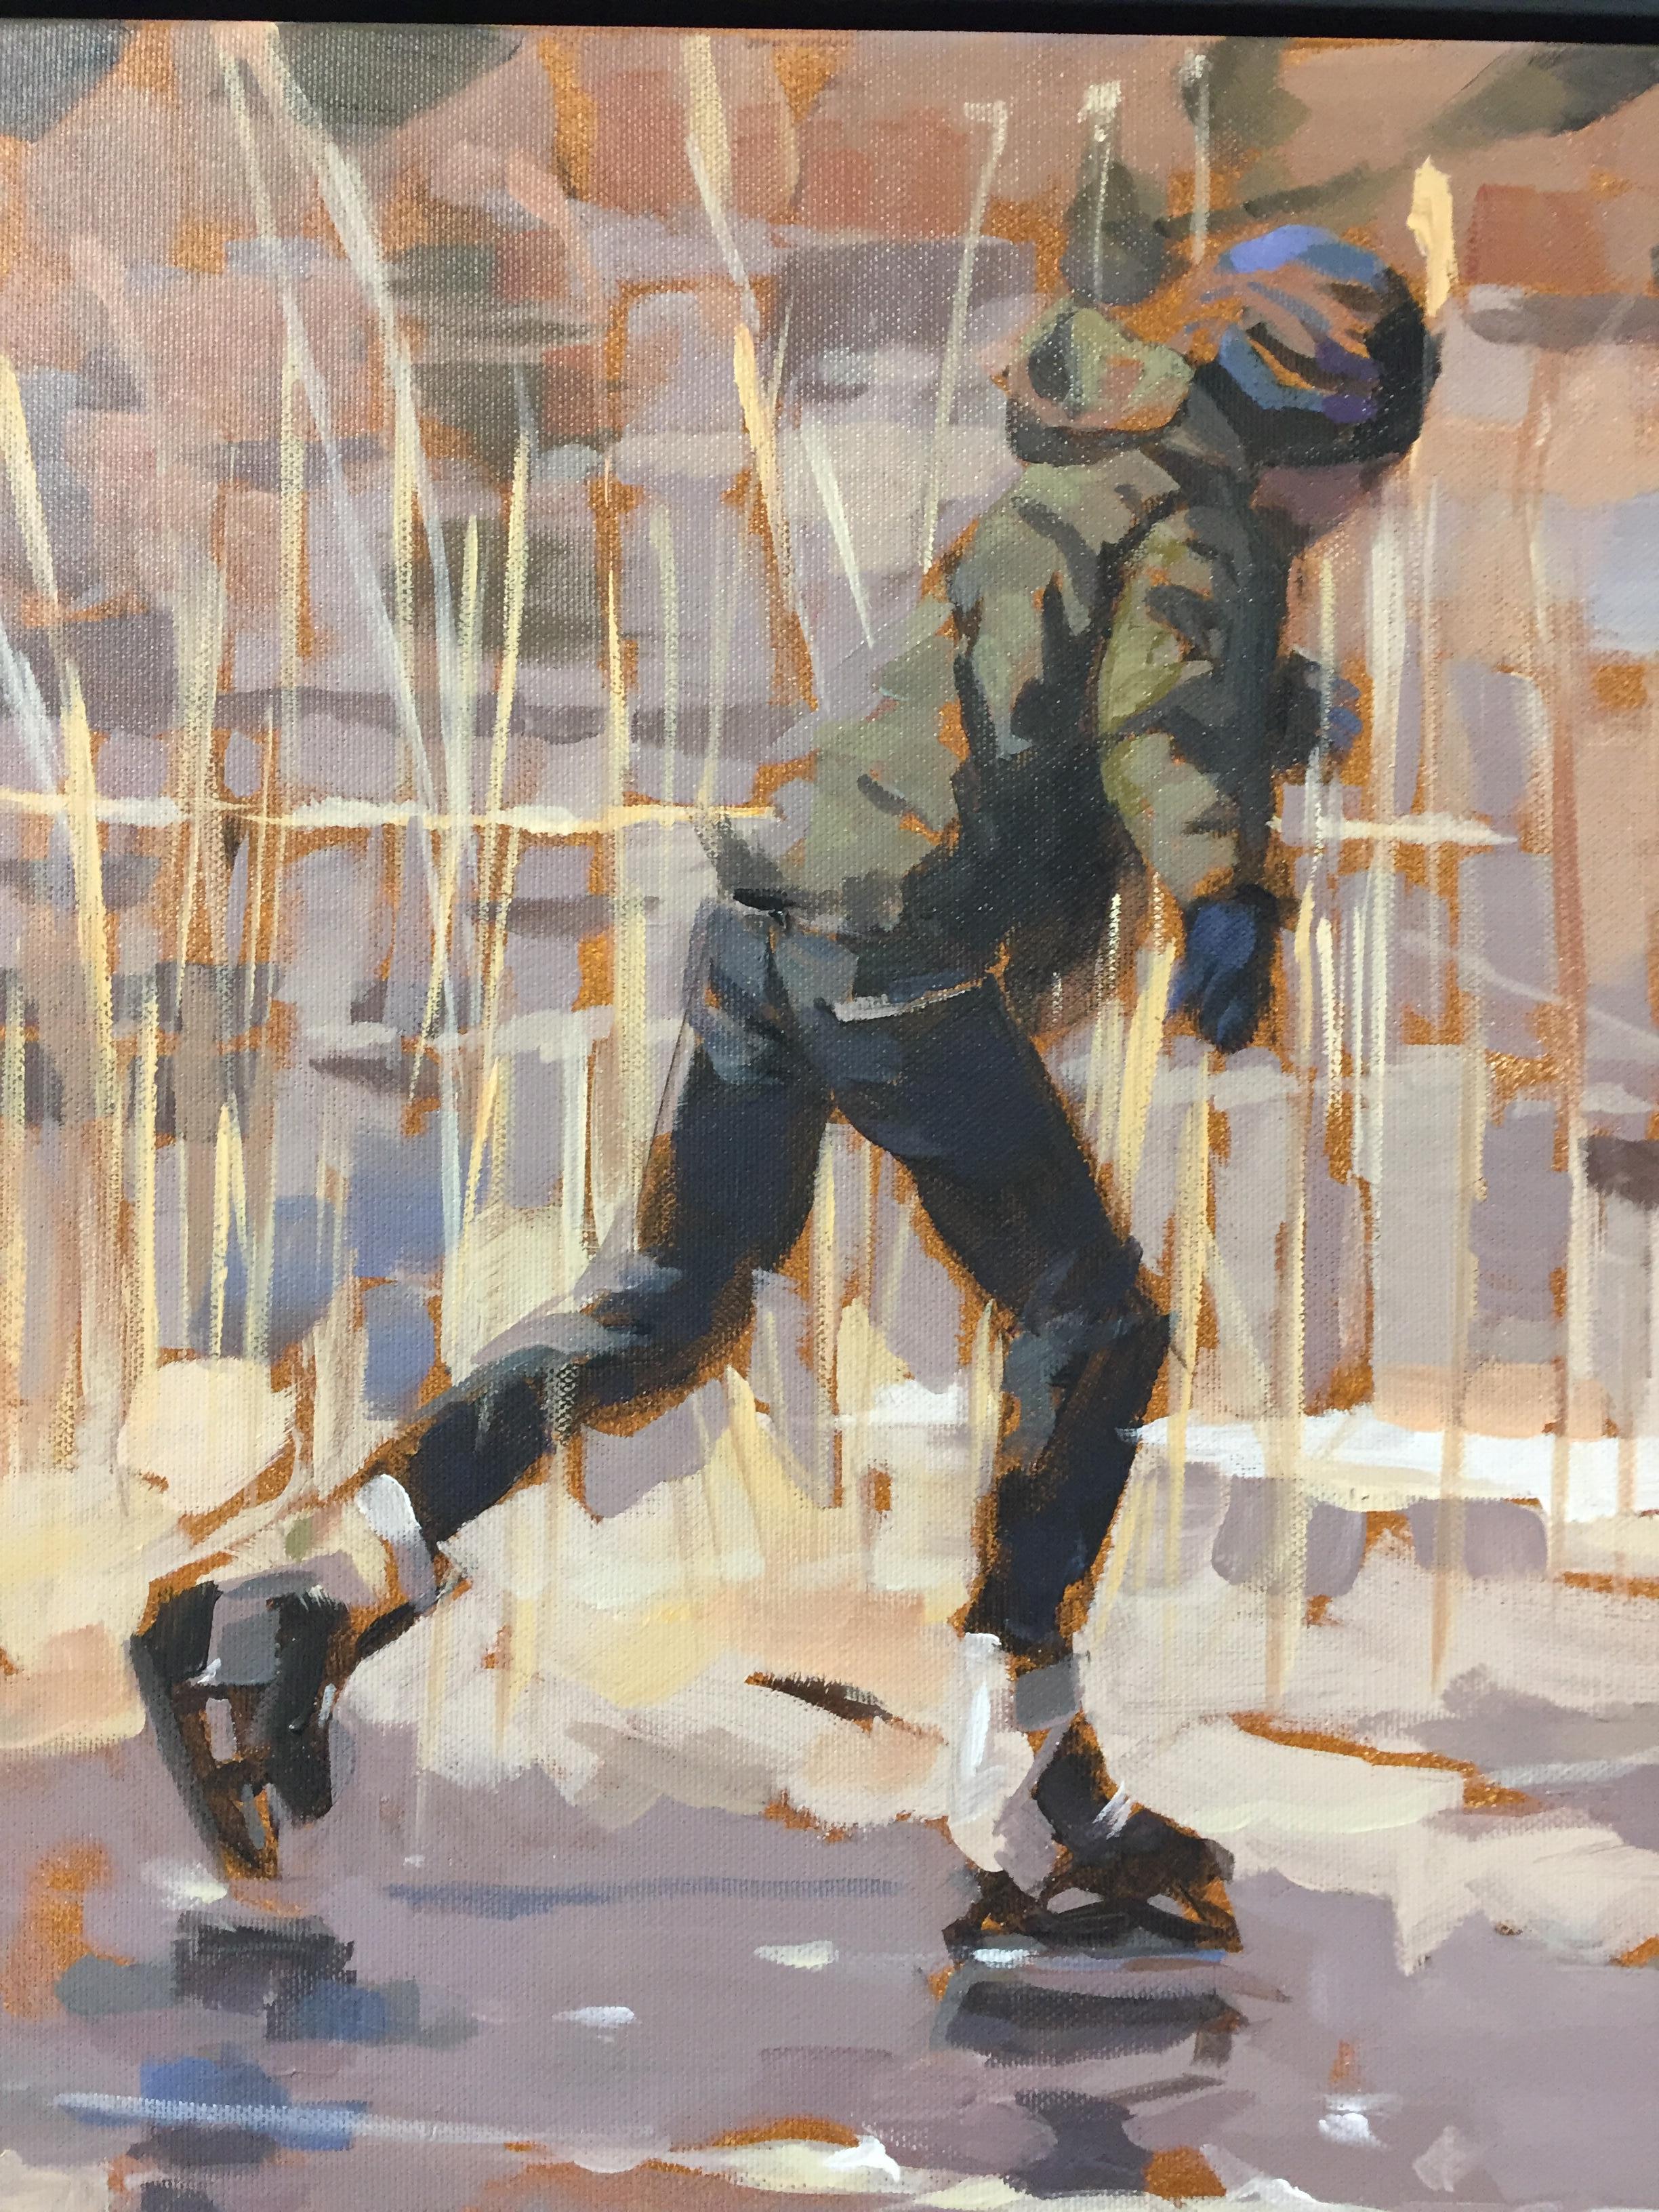 Ice Skating boy- 21st Century Contemporary Figurative Painting by Mitzy Renooy 3